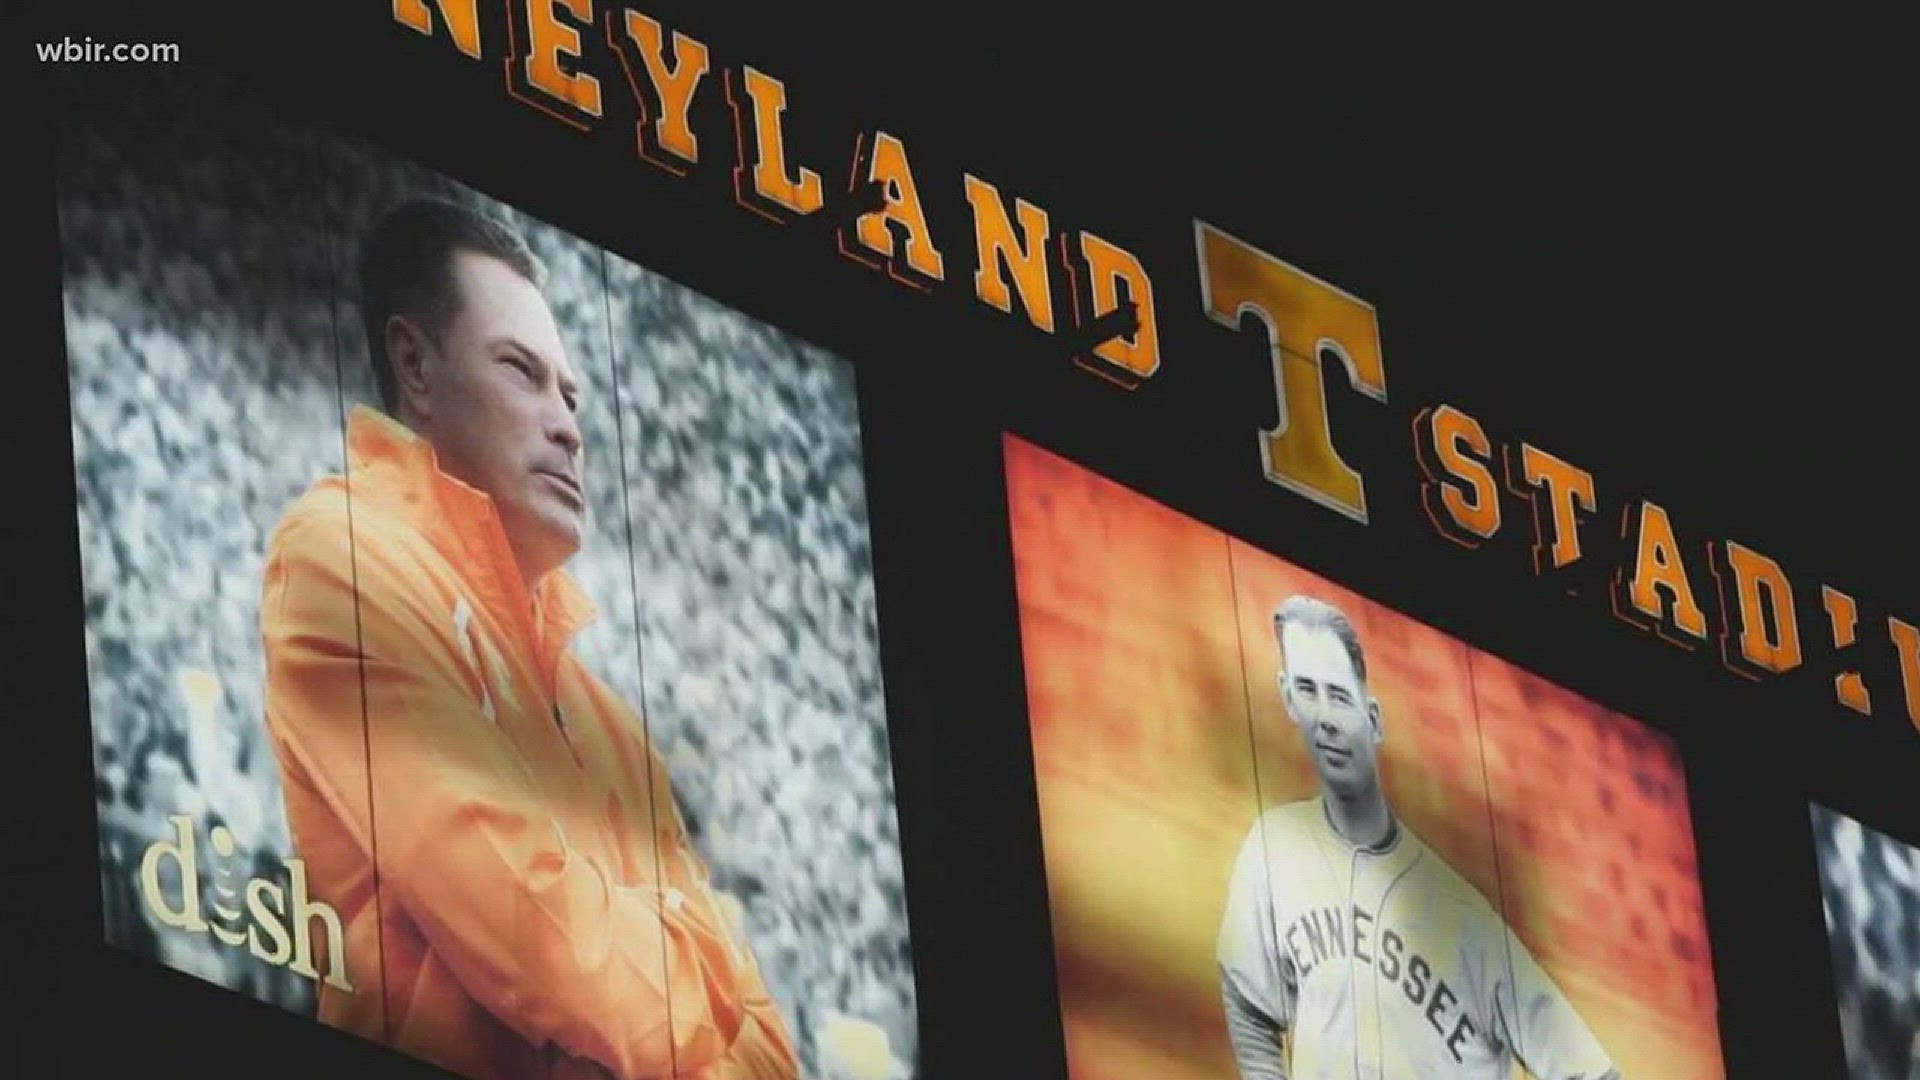 Jan. 12, 2018: Butch Jones is no longer the head football coach at the University of Tennessee, but his picture still remains on the back of the video board at Neyland Stadium.